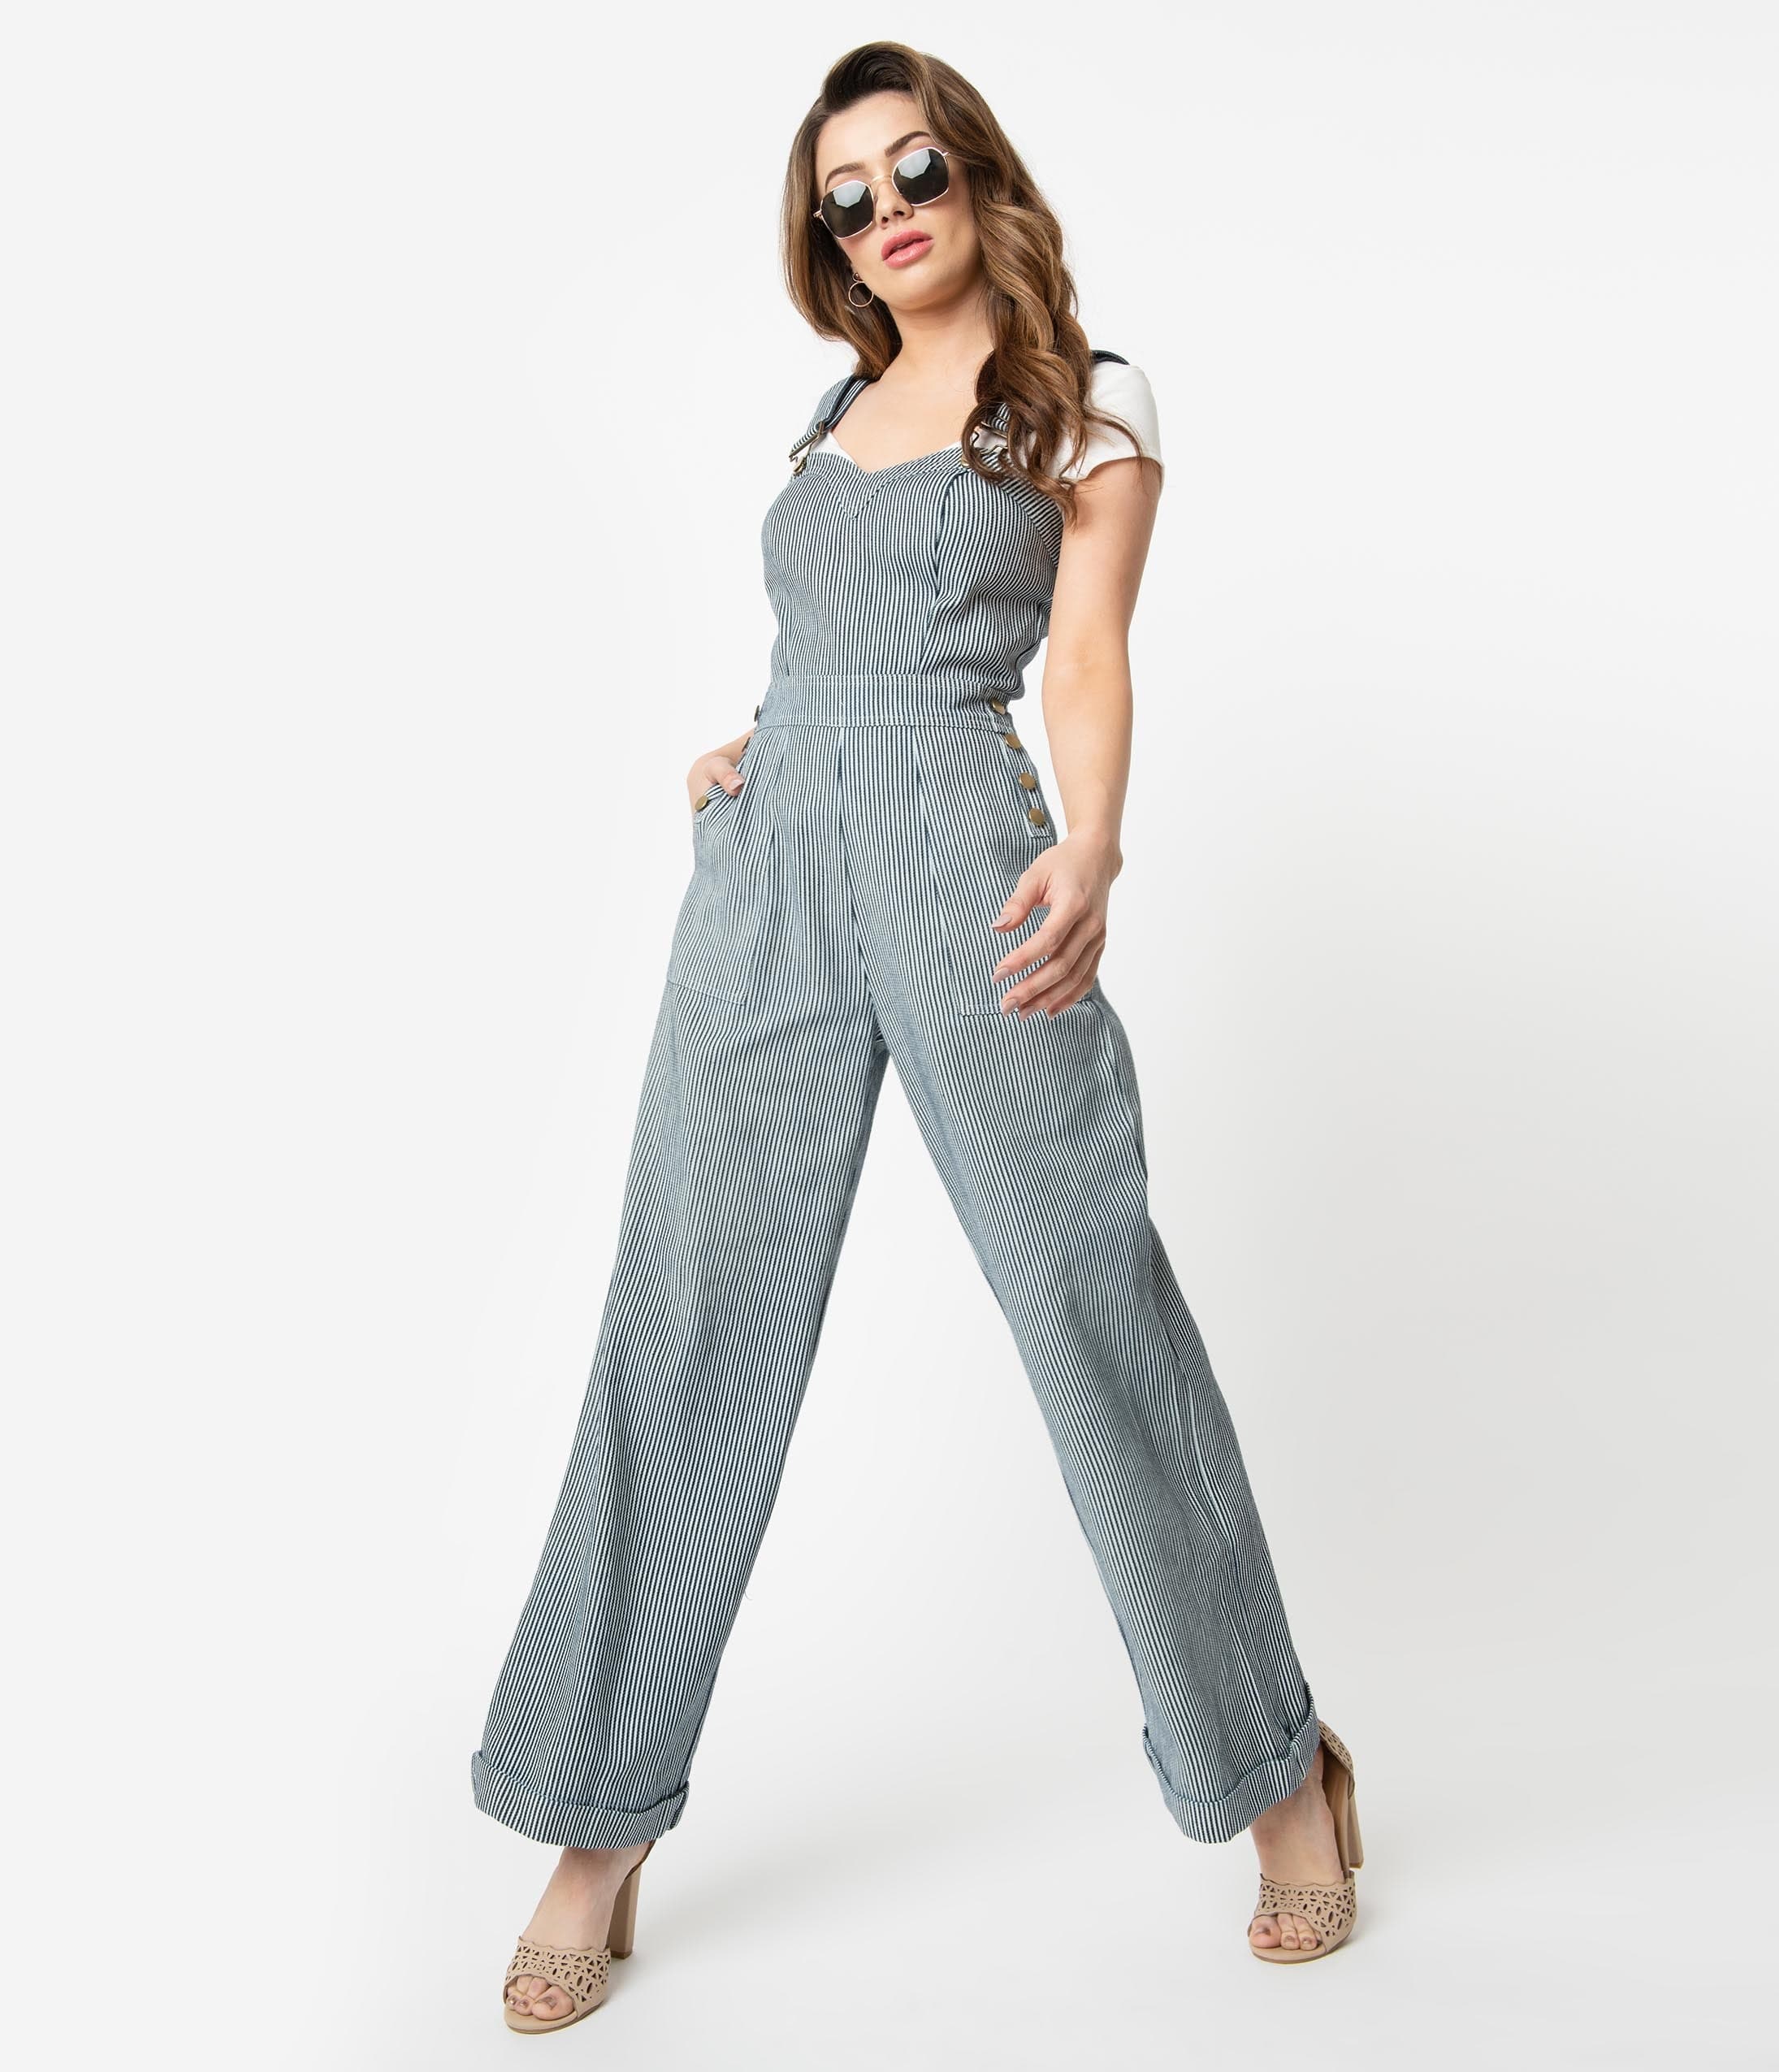 Vintage Overalls 1910s -1950s History & Shop Overalls